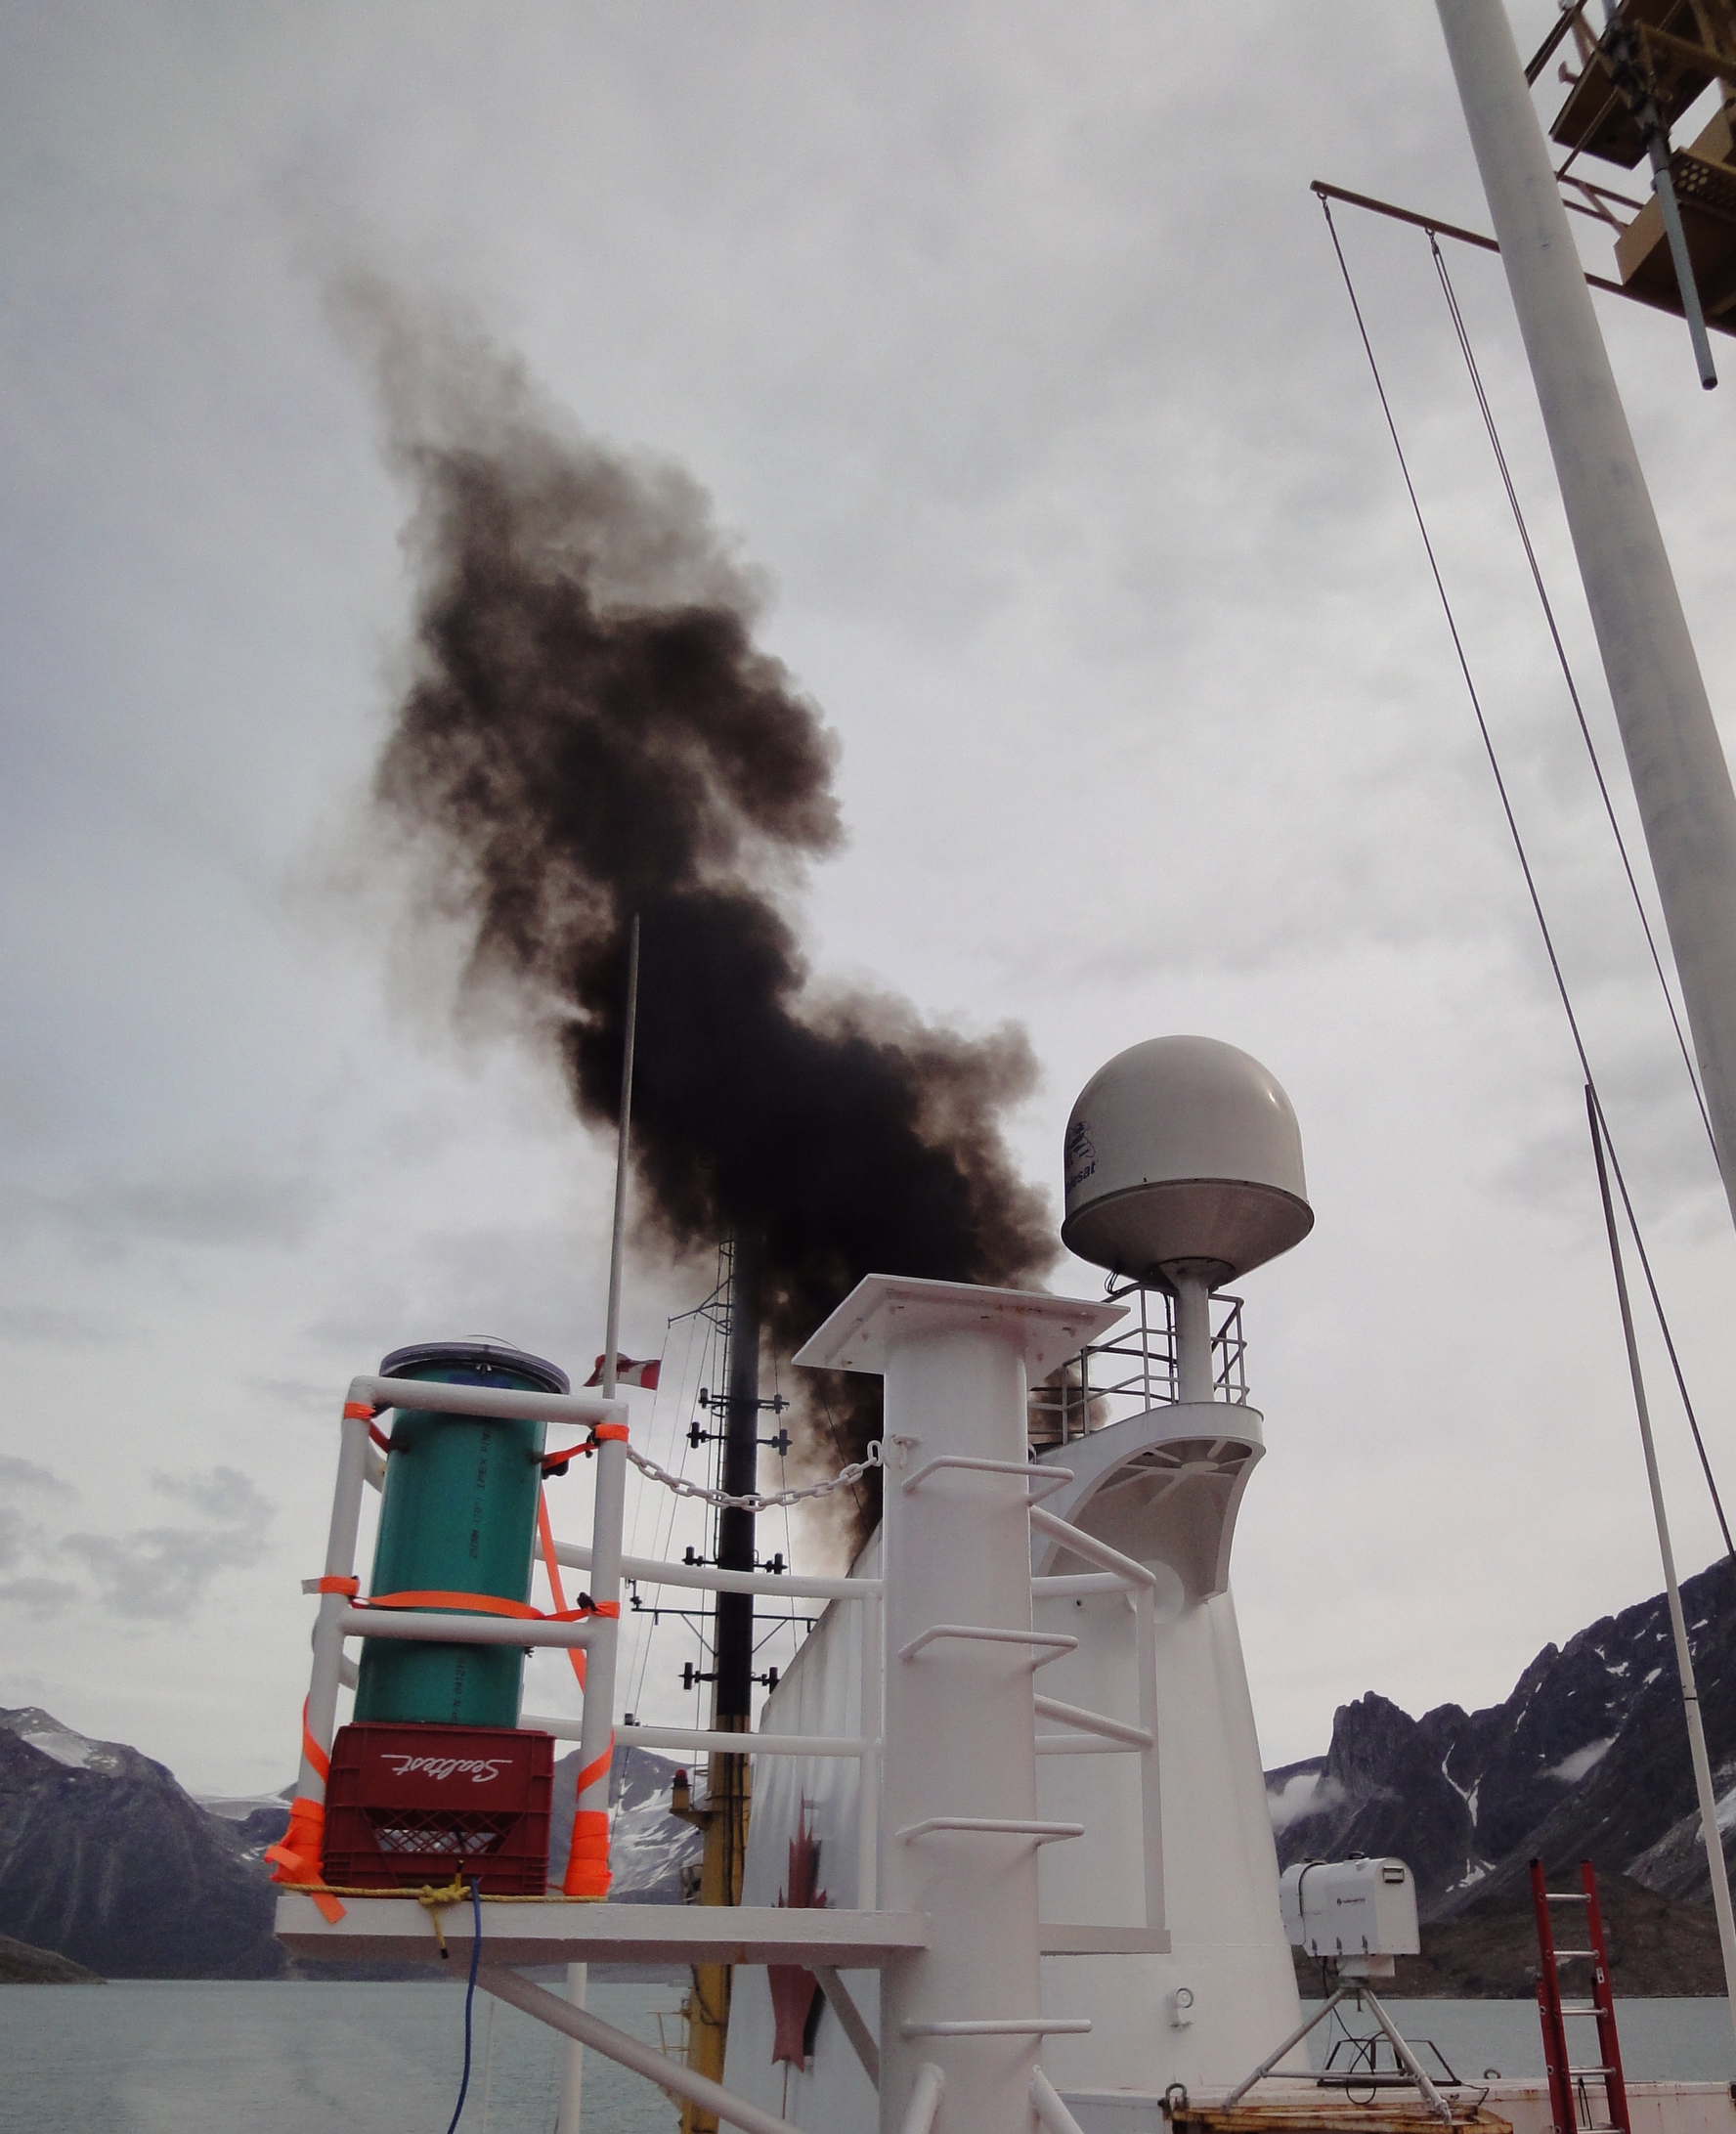 Dirty-burning heavy fuel oil produces ship exhaust like this black plume, which then deposits heat-absorbing particles. The sludgy fuel would be damaging if spilled in the Arctic. (FILE PHOTO)